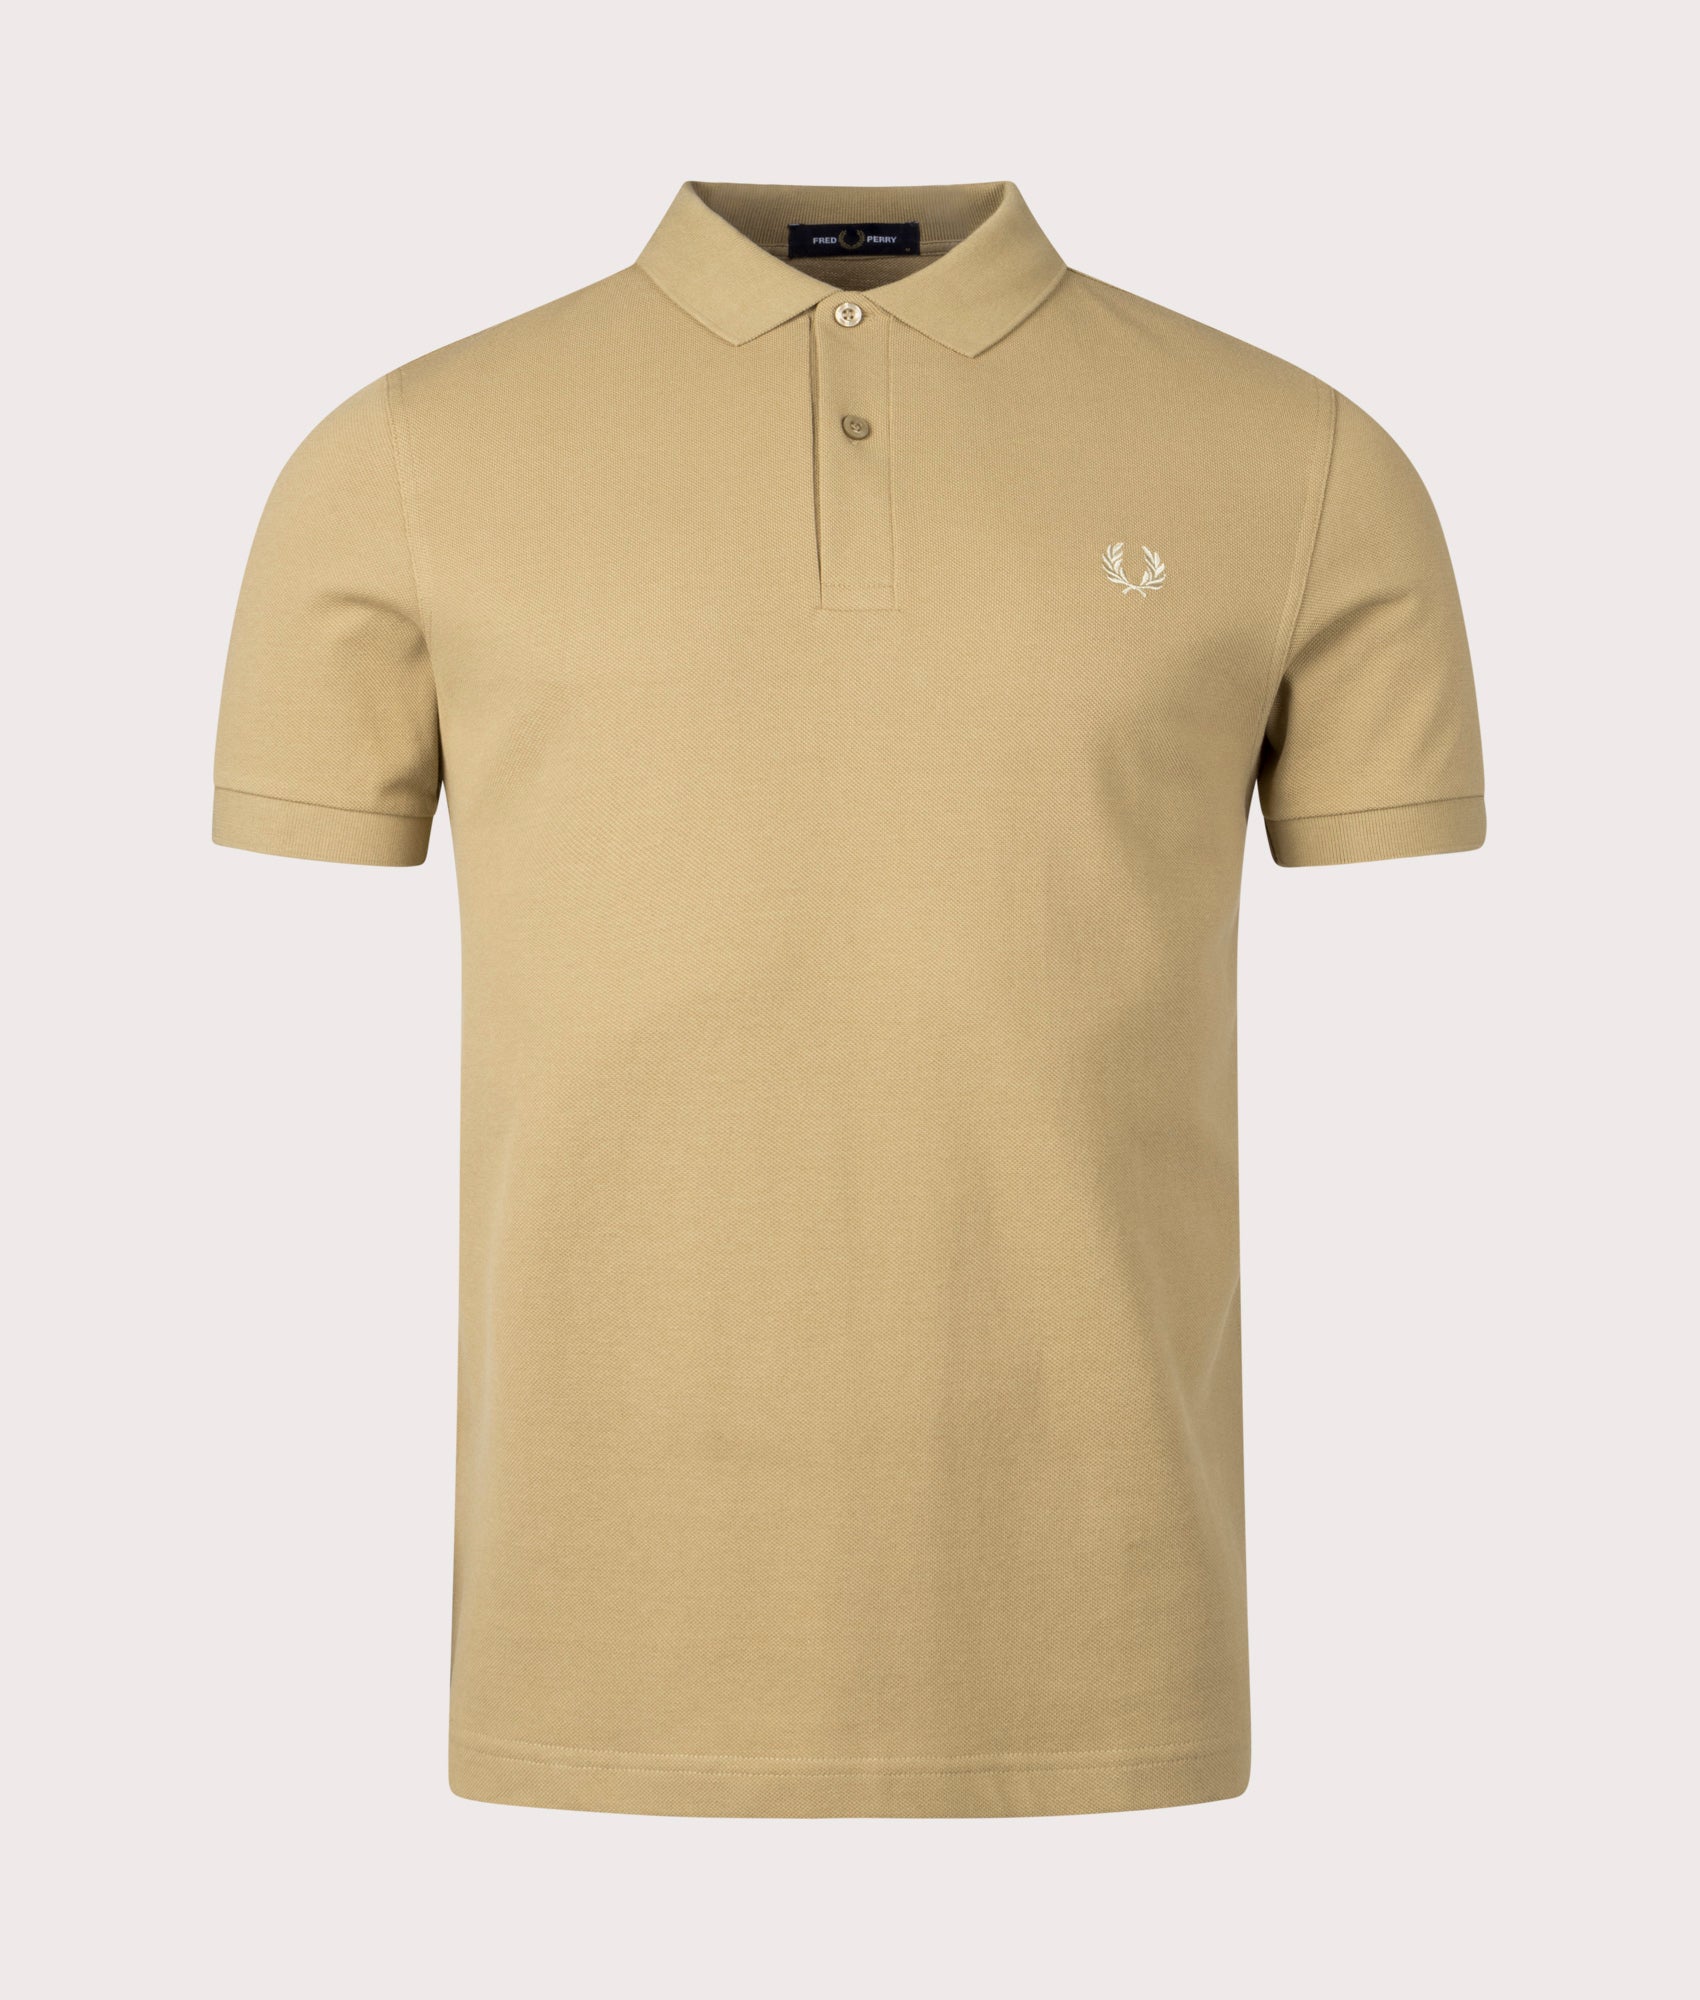 Fred Perry Mens Plain Fred Perry Shirt - Colour: V19 Warm Stone/Oatmeal - Size: XXL